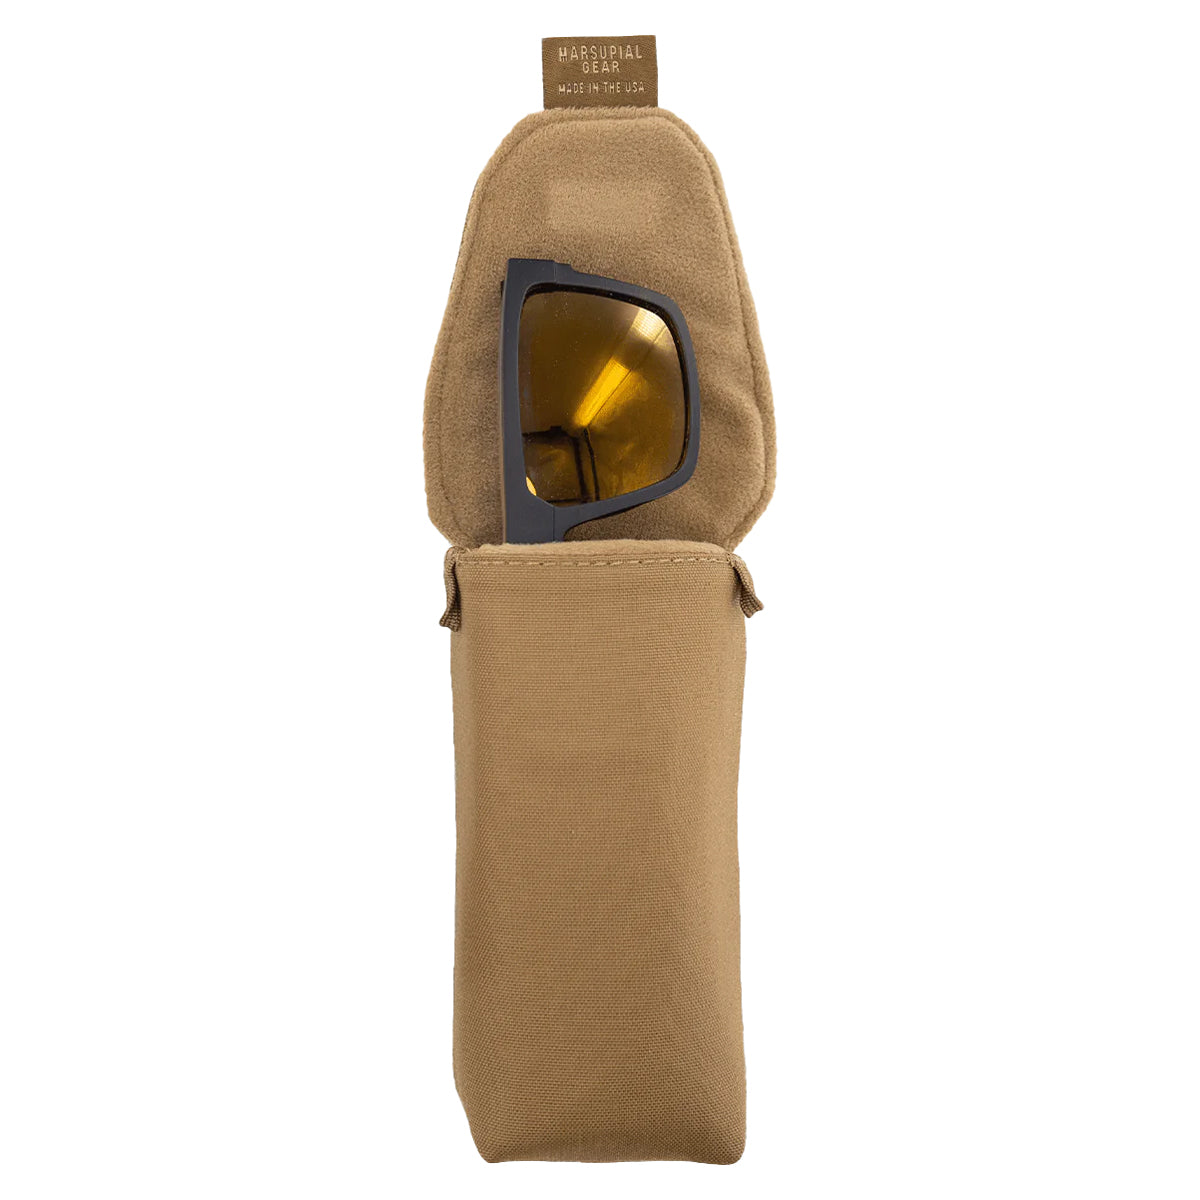 Marsupial Gear Eyeglass Pouch in Coyote by GOHUNT | Marsupial Gear - GOHUNT Shop